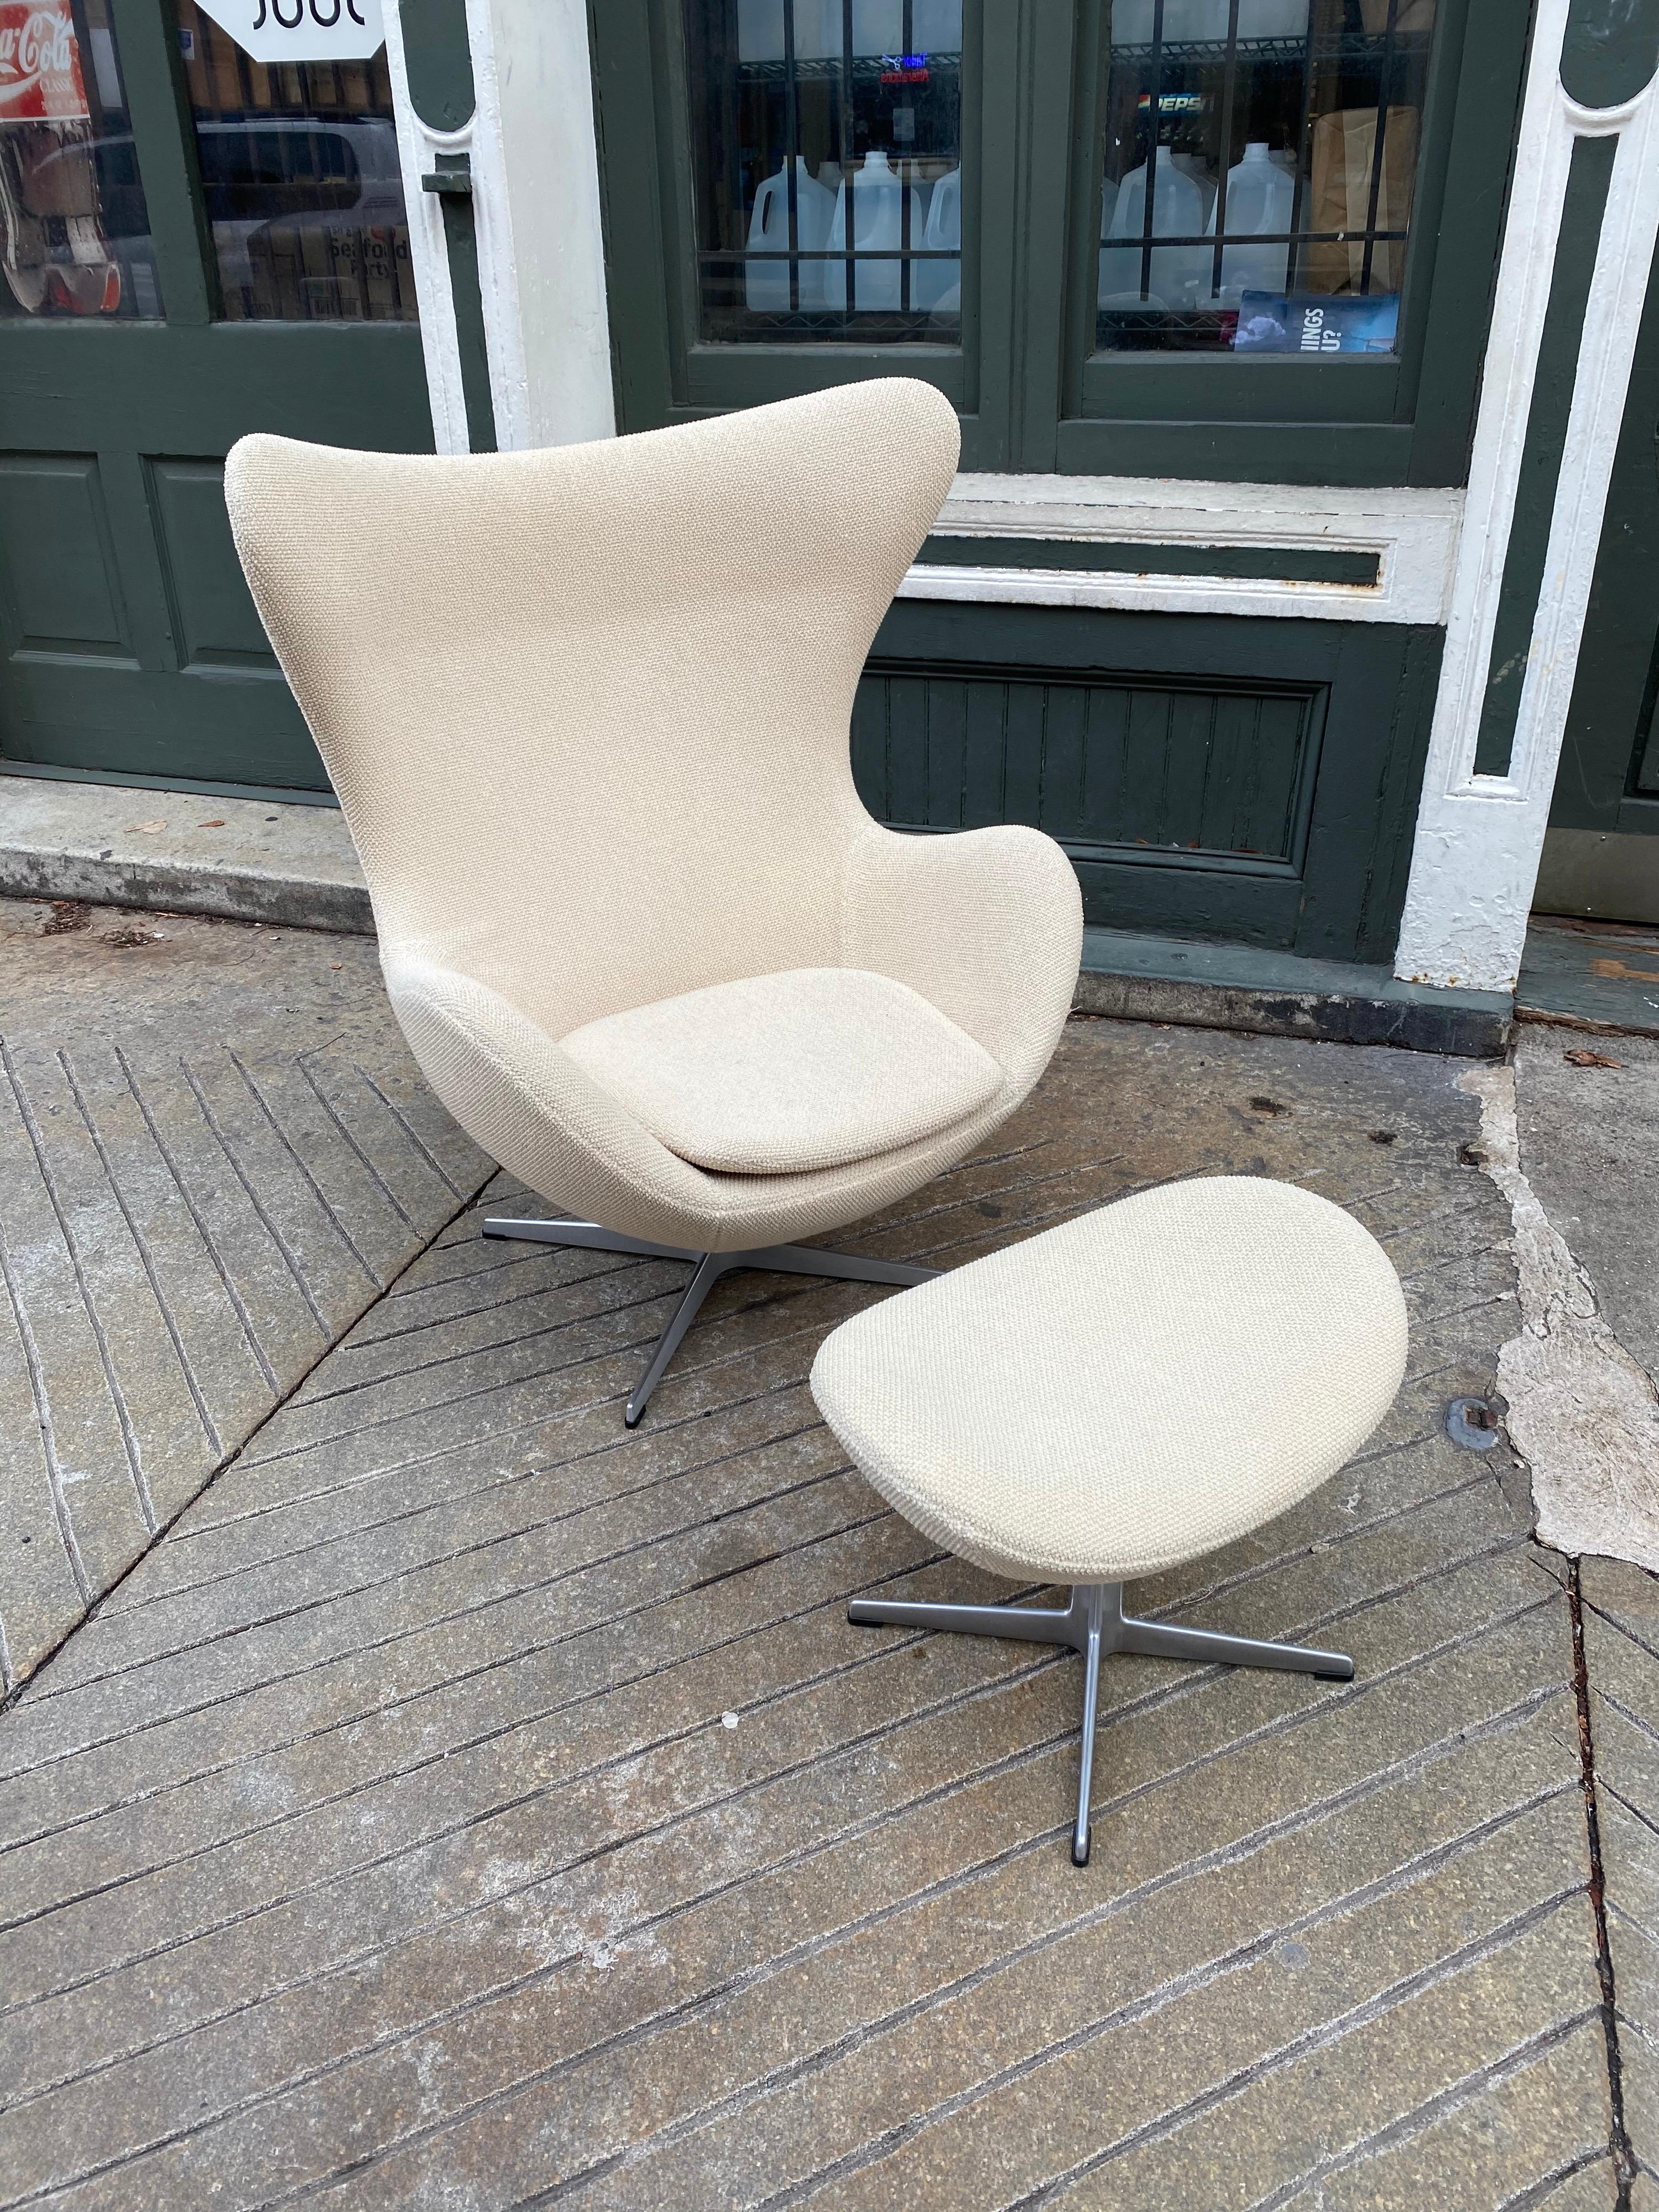 Arne Jacobsen egg chair and ottoman by Fritz Hansen in Knoll Ivory loop fabric. Chair dates to 2008. Chair is in great condition, showing no real wear! This is a tilting and swiveling model ready to go! New with this fabric chair and ottoman are